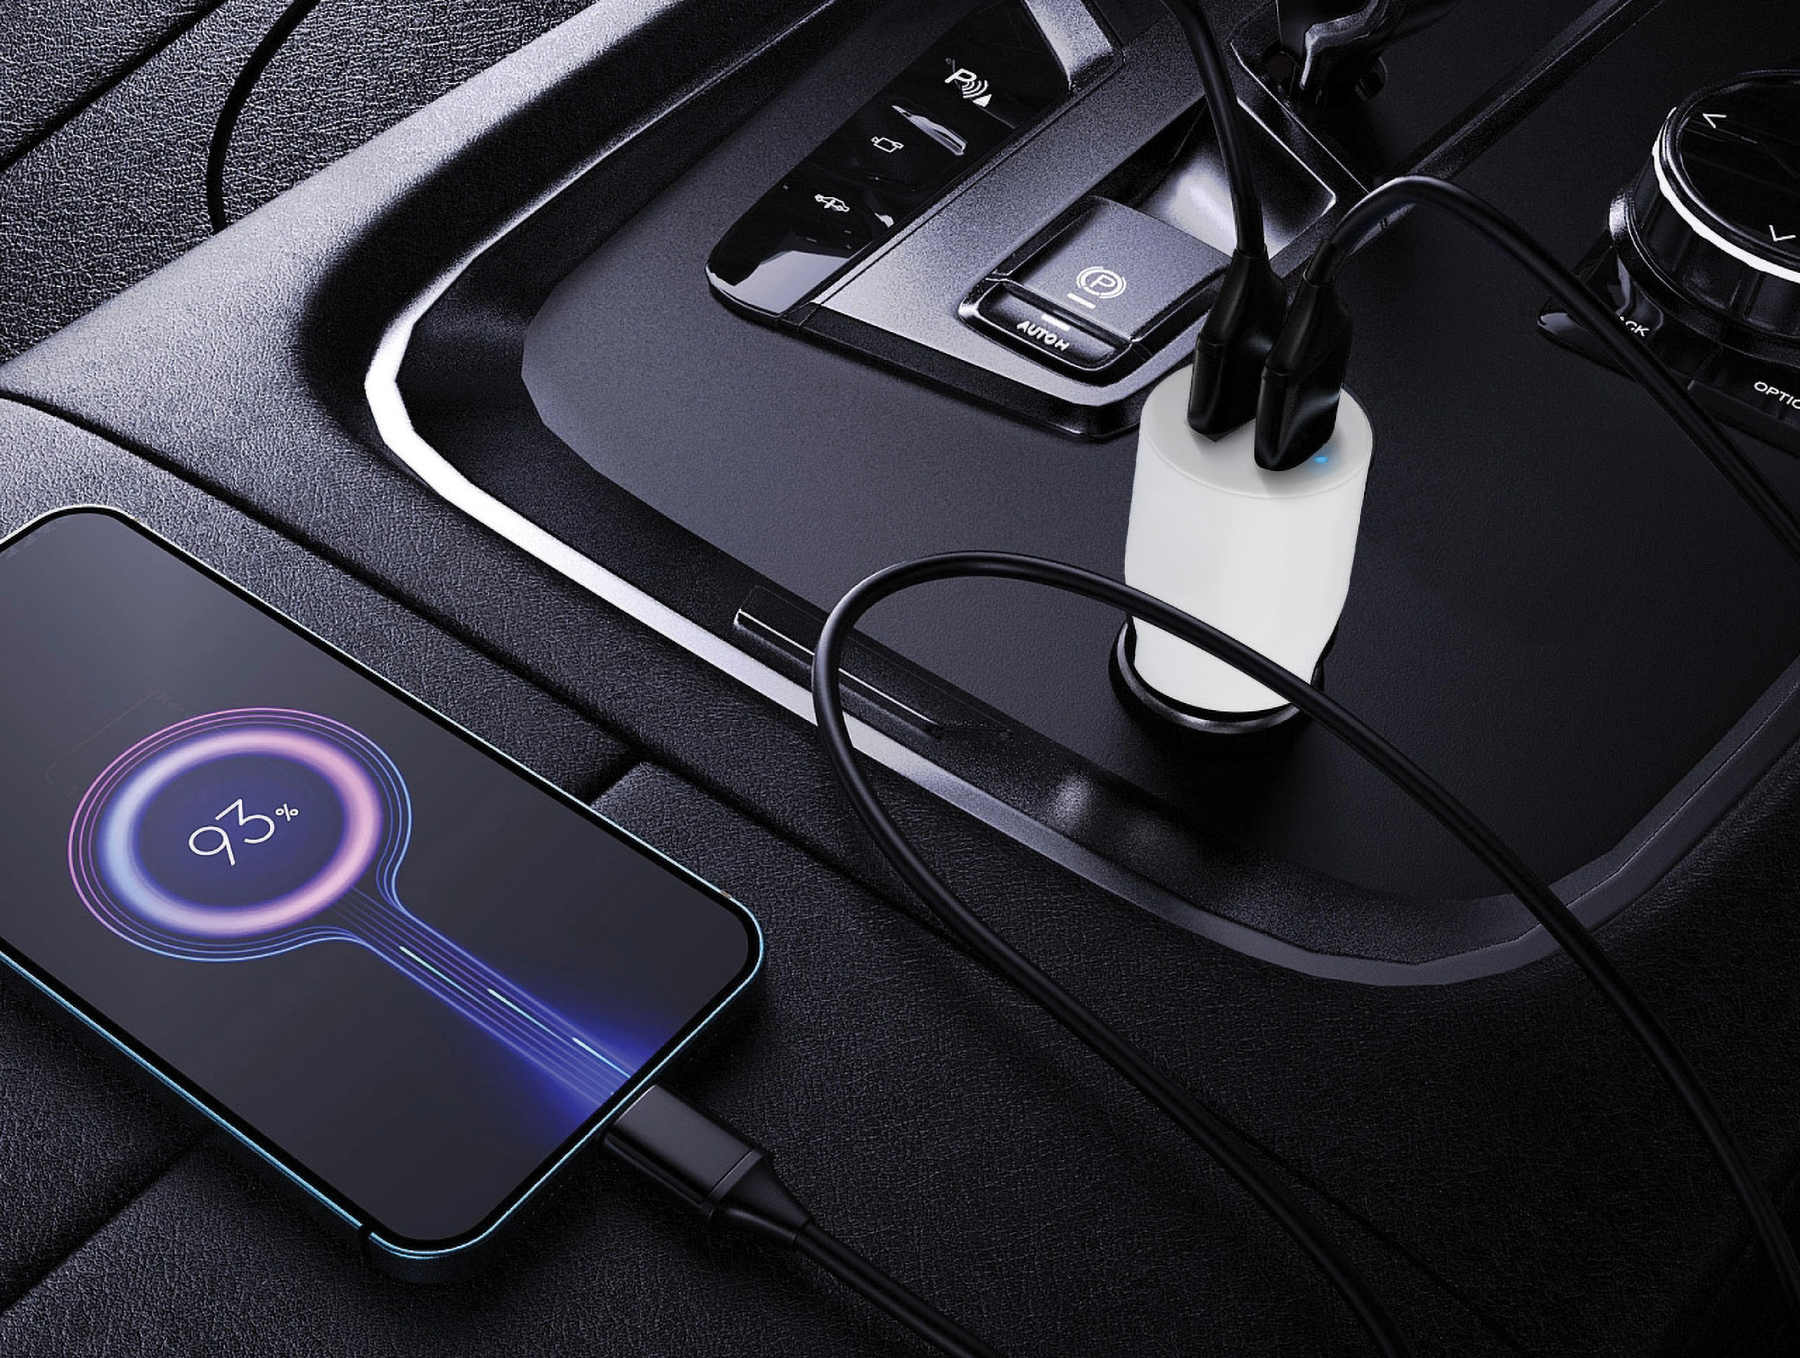 Skross Fast Charging 20w USB Car Charger in a car with both sockets being used